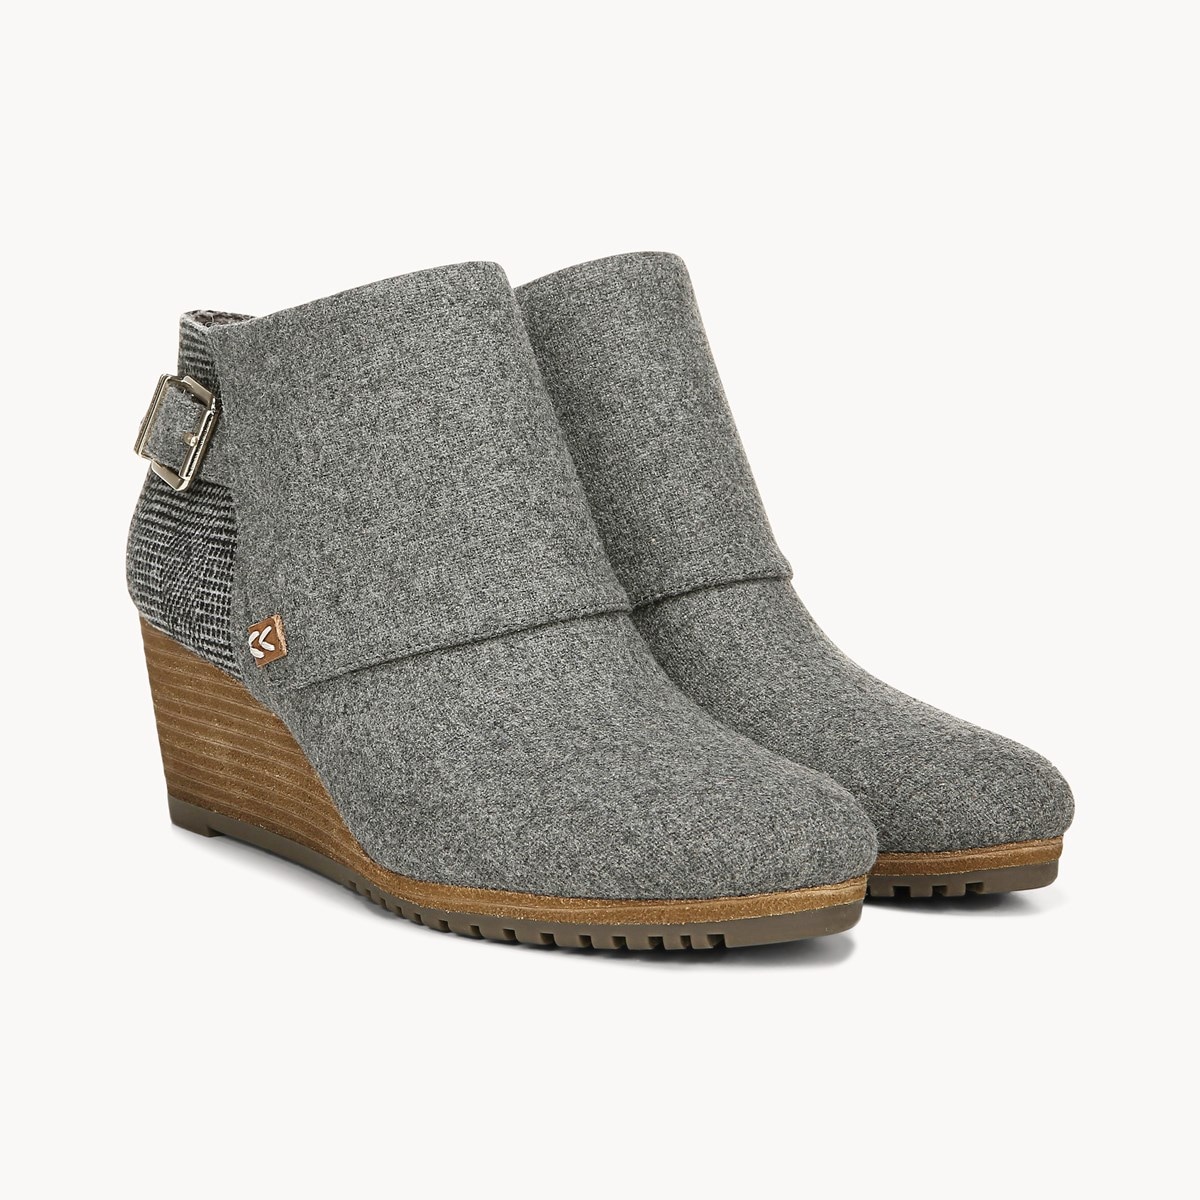 Create Wedge Bootie in Mid Grey Flannel 